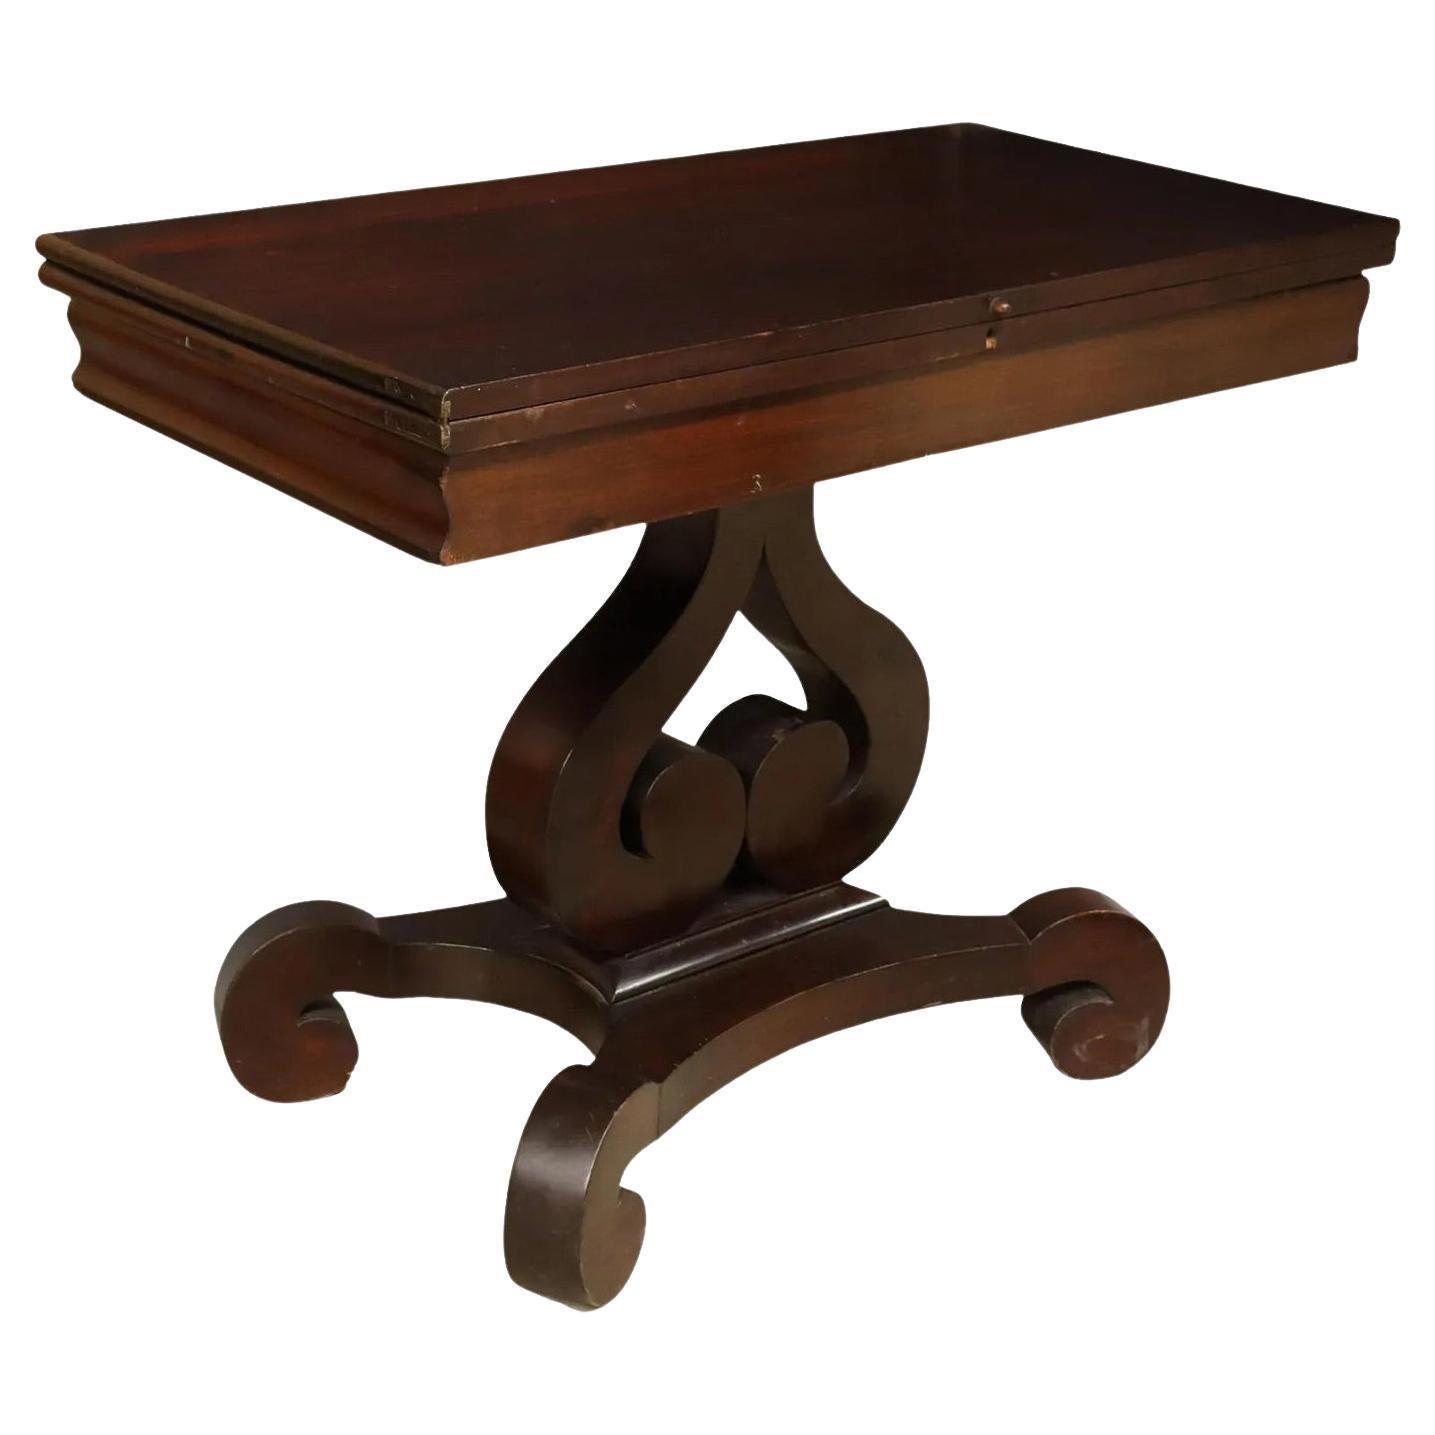 Antique American Empire Period Mahogany Games Table For Sale